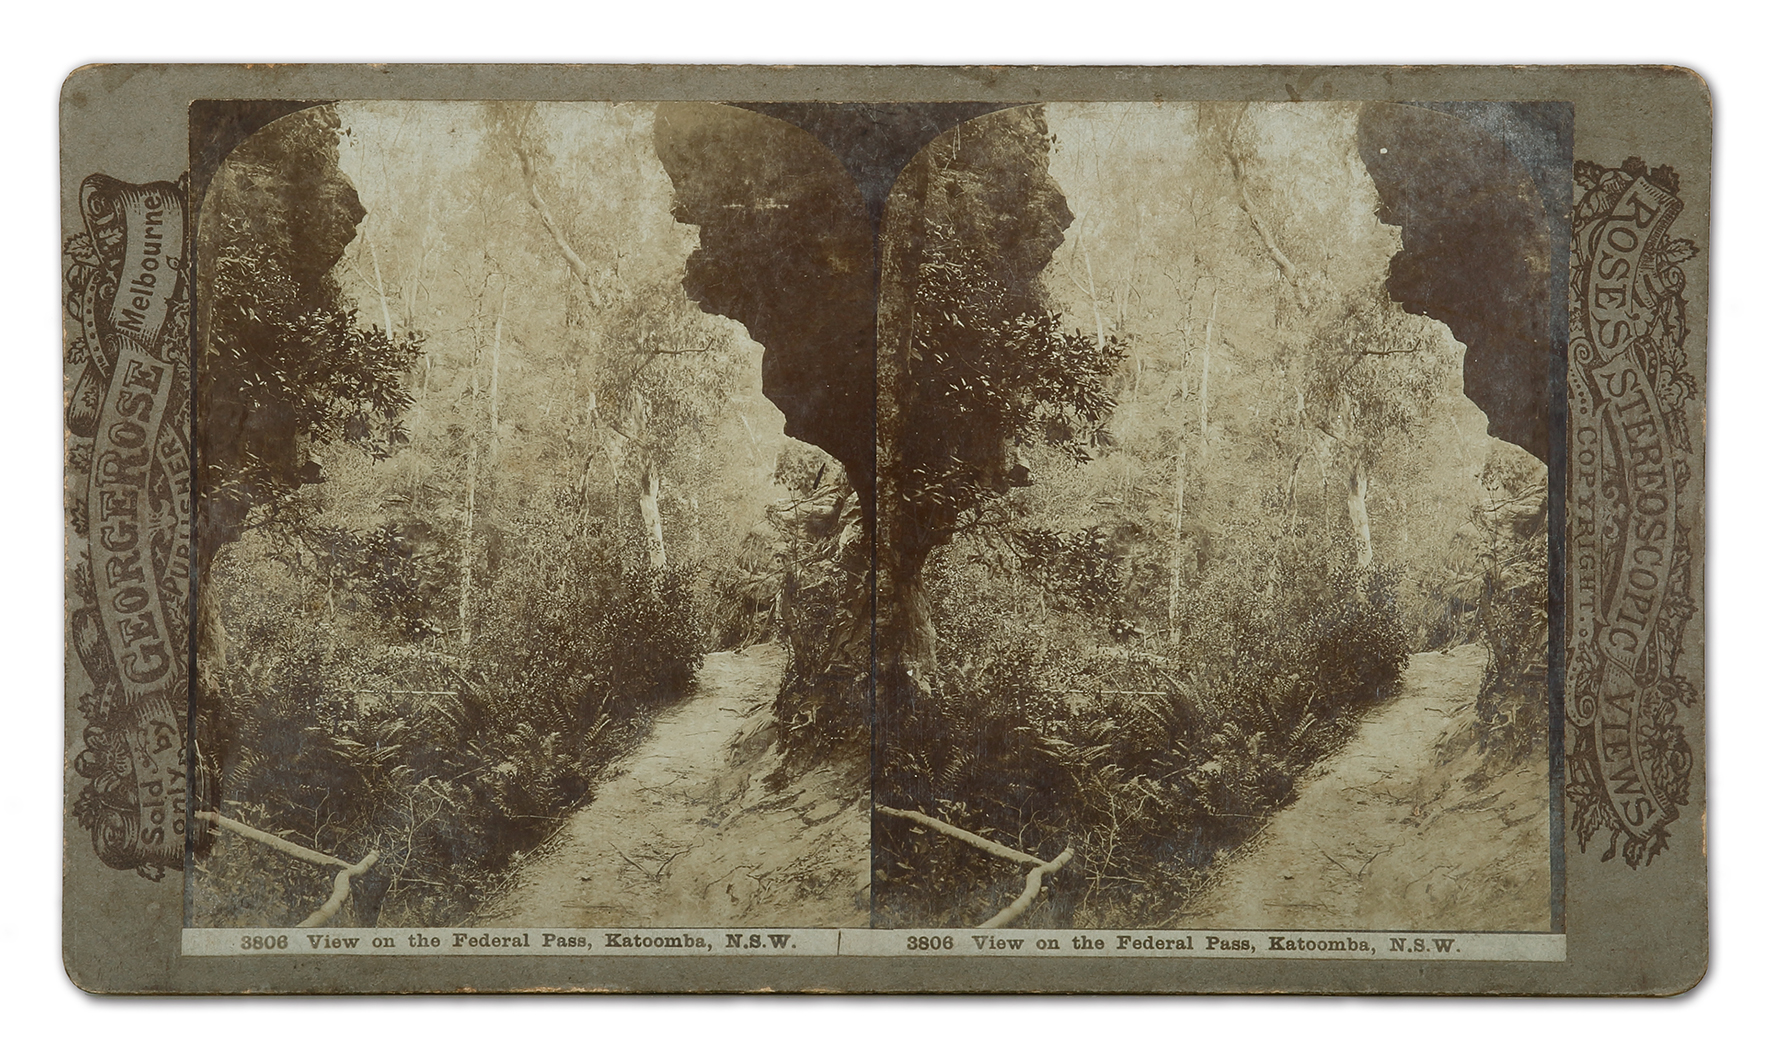 3806 View on the Federal Pass, Katoomba, N.S.W. - Antique Photograph from 1900